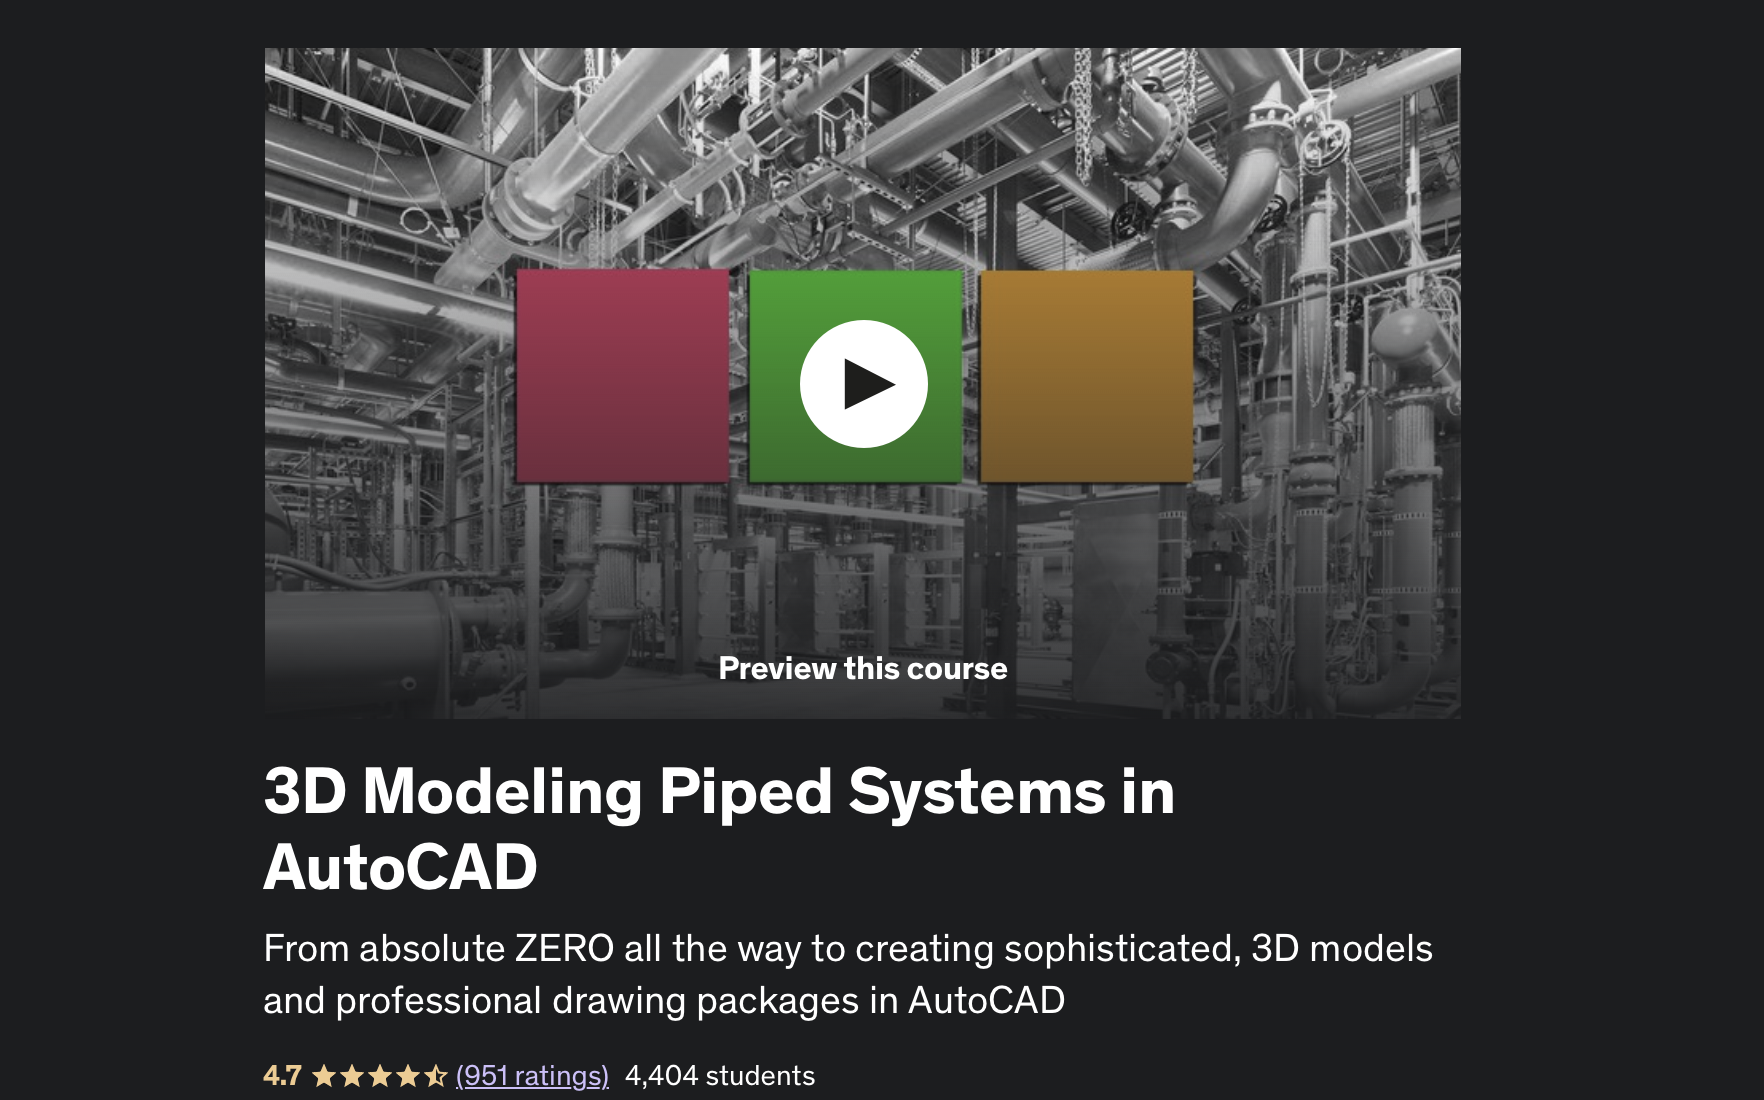 3D Modeling Piped Systems in AutoCAD